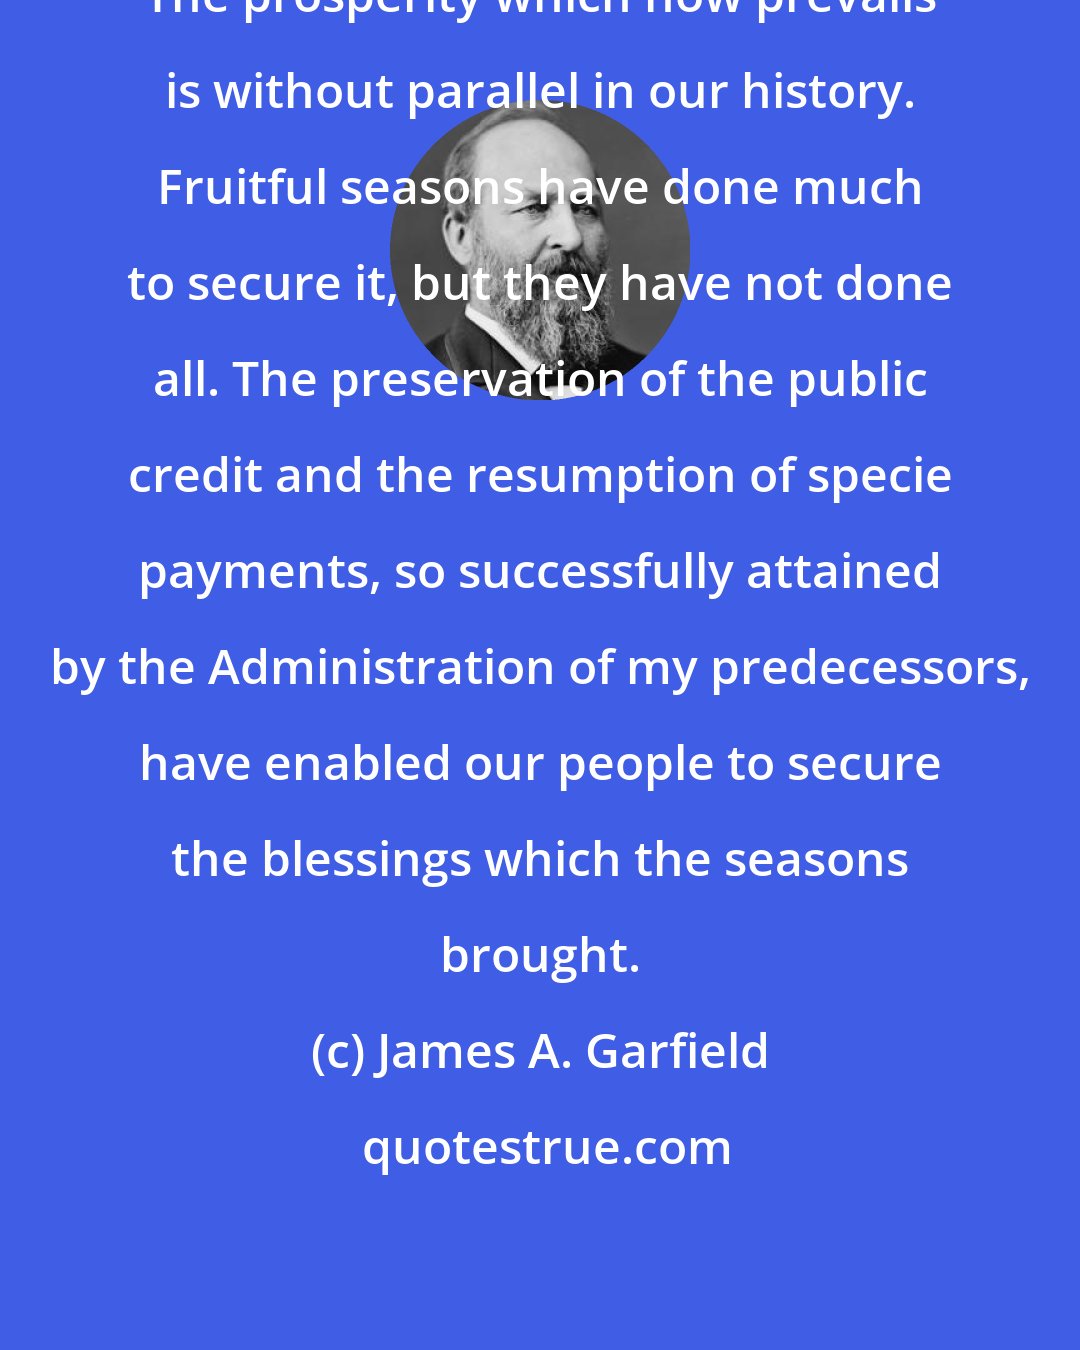 James A. Garfield: The prosperity which now prevails is without parallel in our history. Fruitful seasons have done much to secure it, but they have not done all. The preservation of the public credit and the resumption of specie payments, so successfully attained by the Administration of my predecessors, have enabled our people to secure the blessings which the seasons brought.